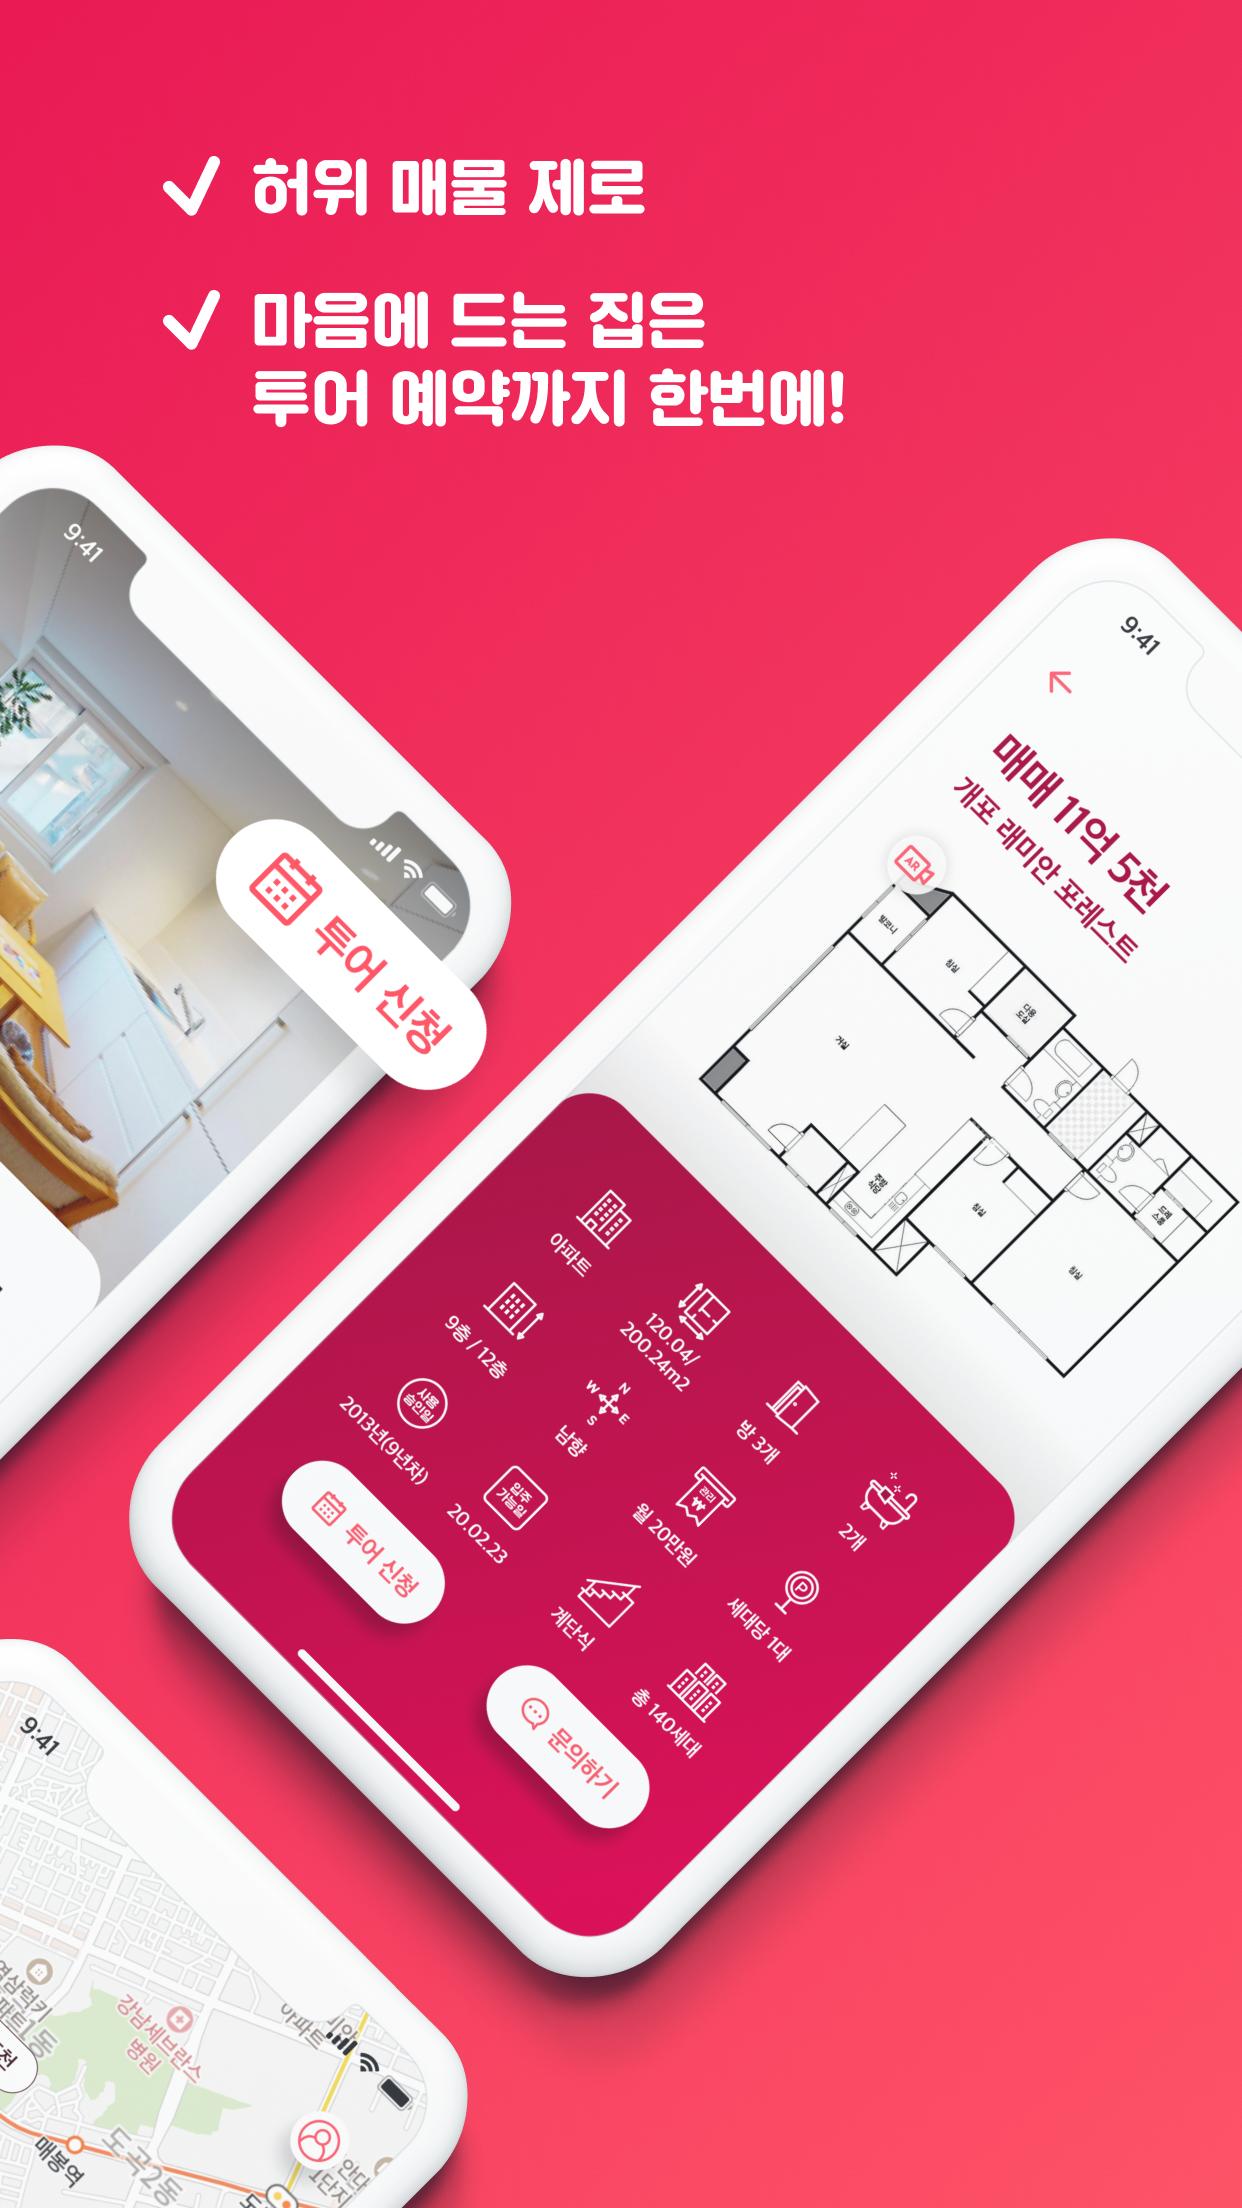 Dongnae Real Estate: Find Your Home 1.0.2 Screenshot 12